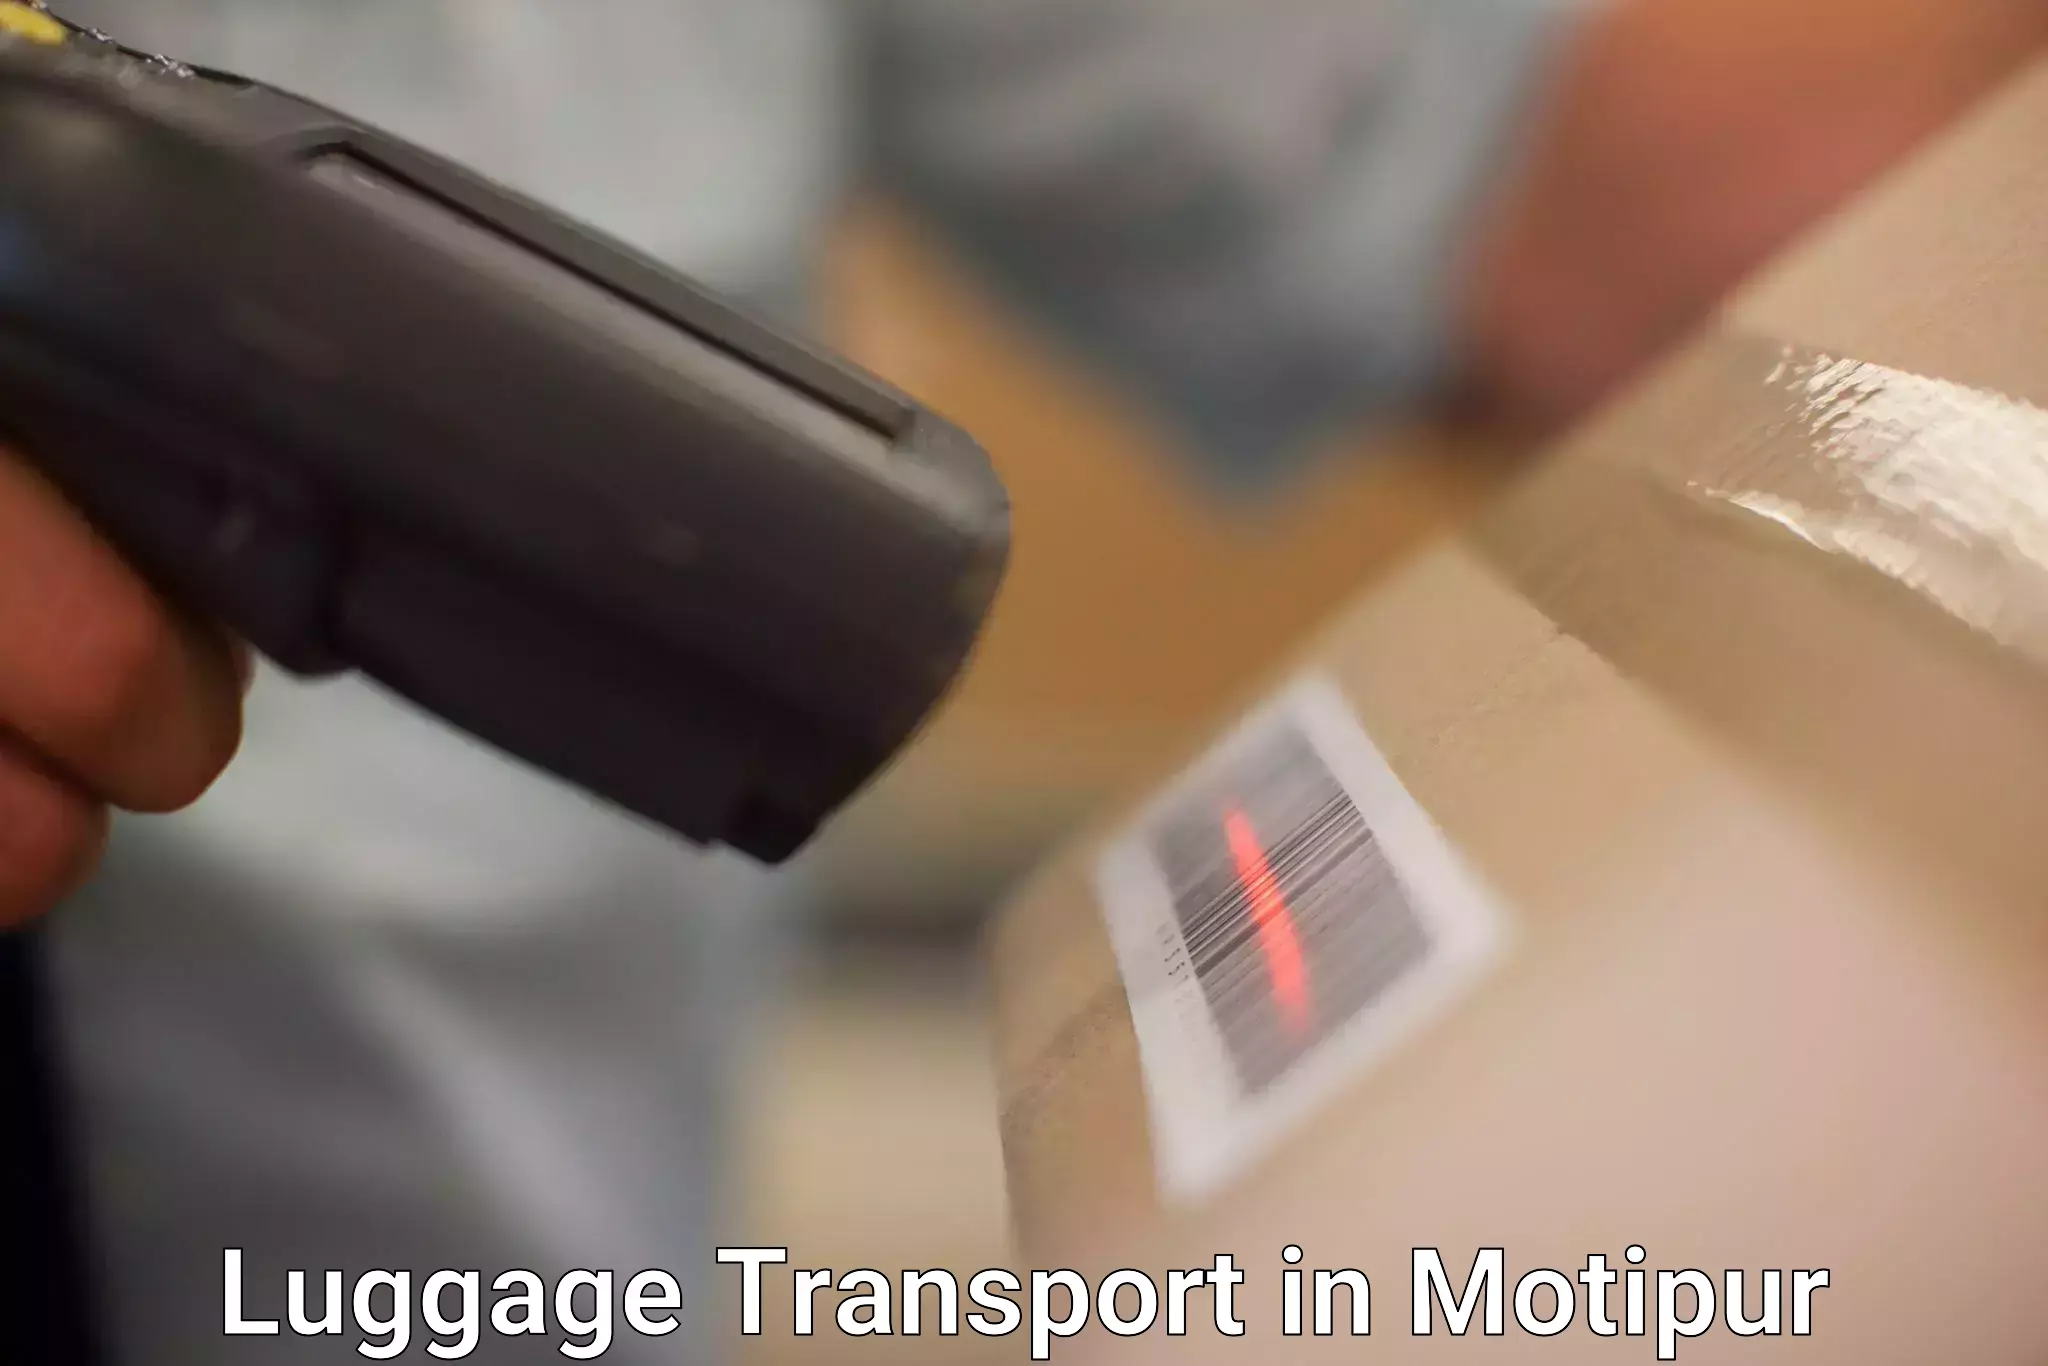 Baggage transport services in Motipur